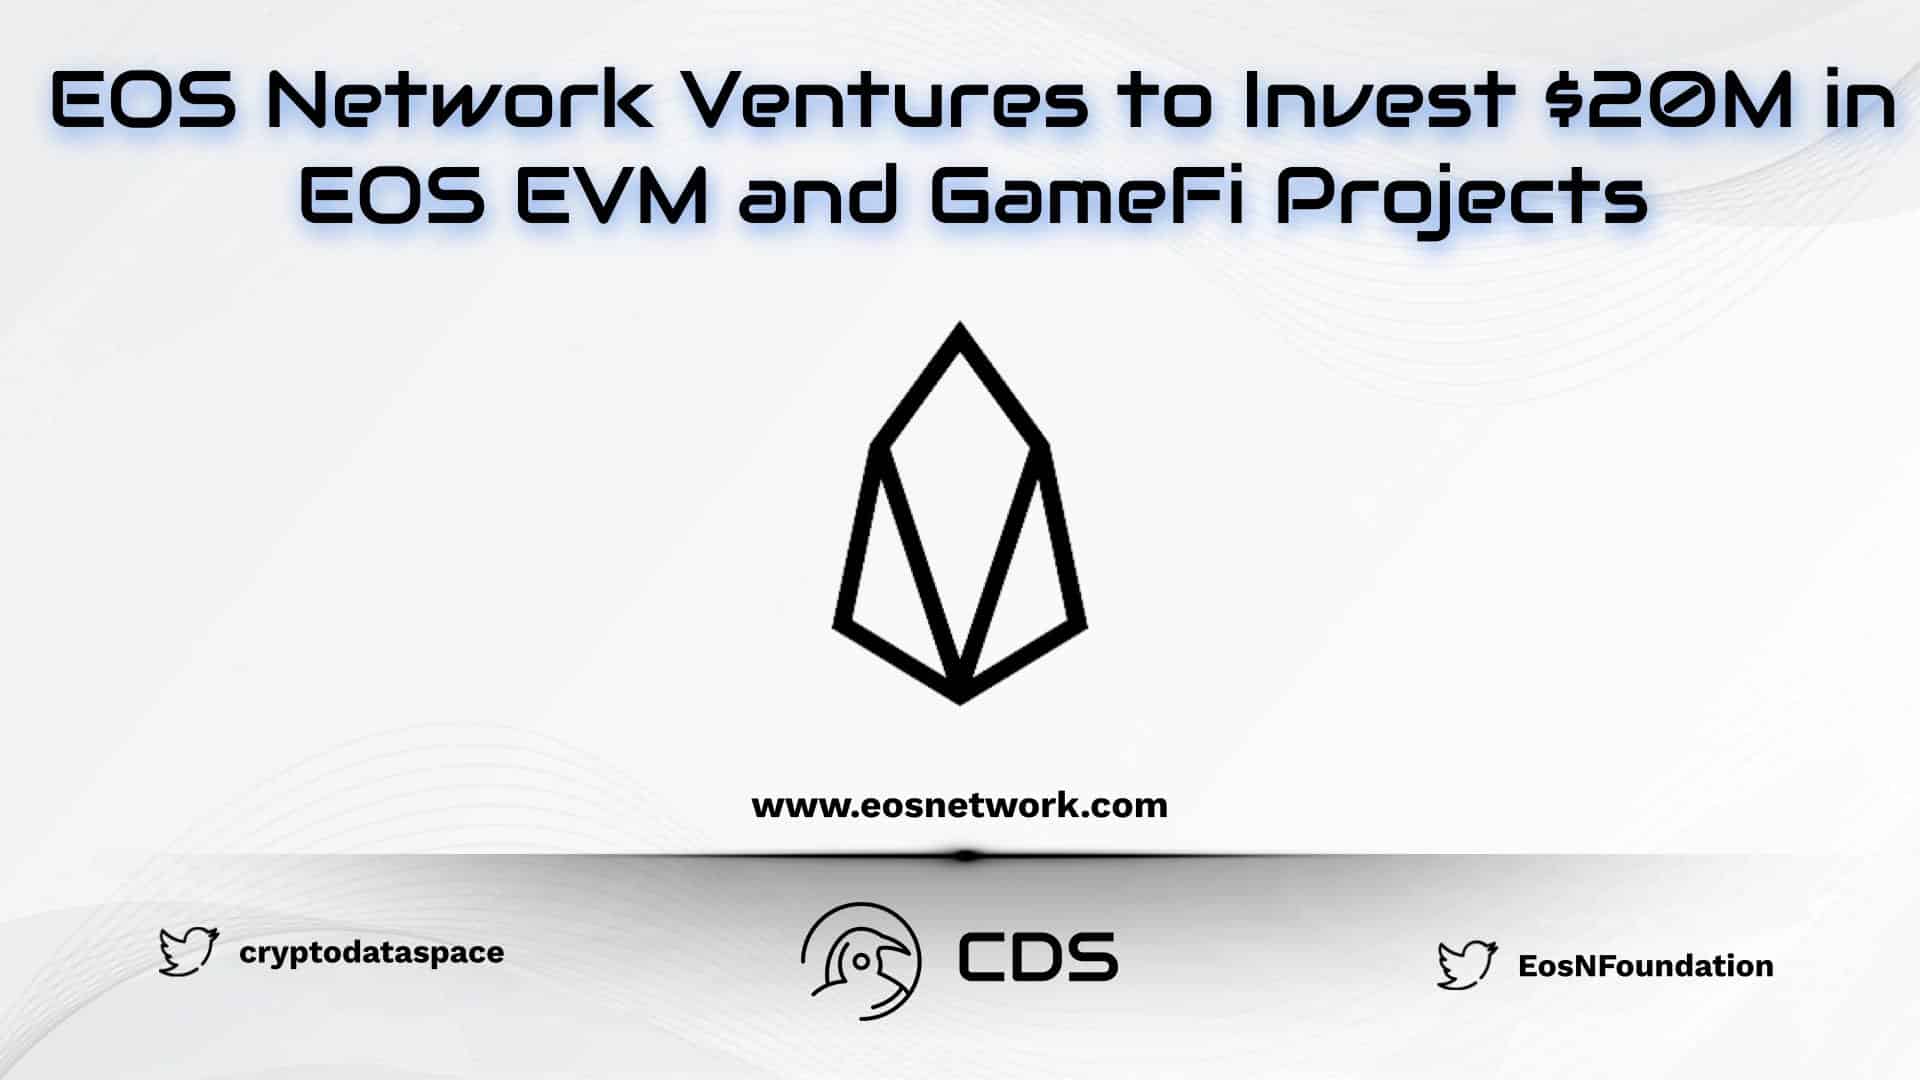 EOS Network Ventures to Invest $20M in EOS EVM and GameFi Projects